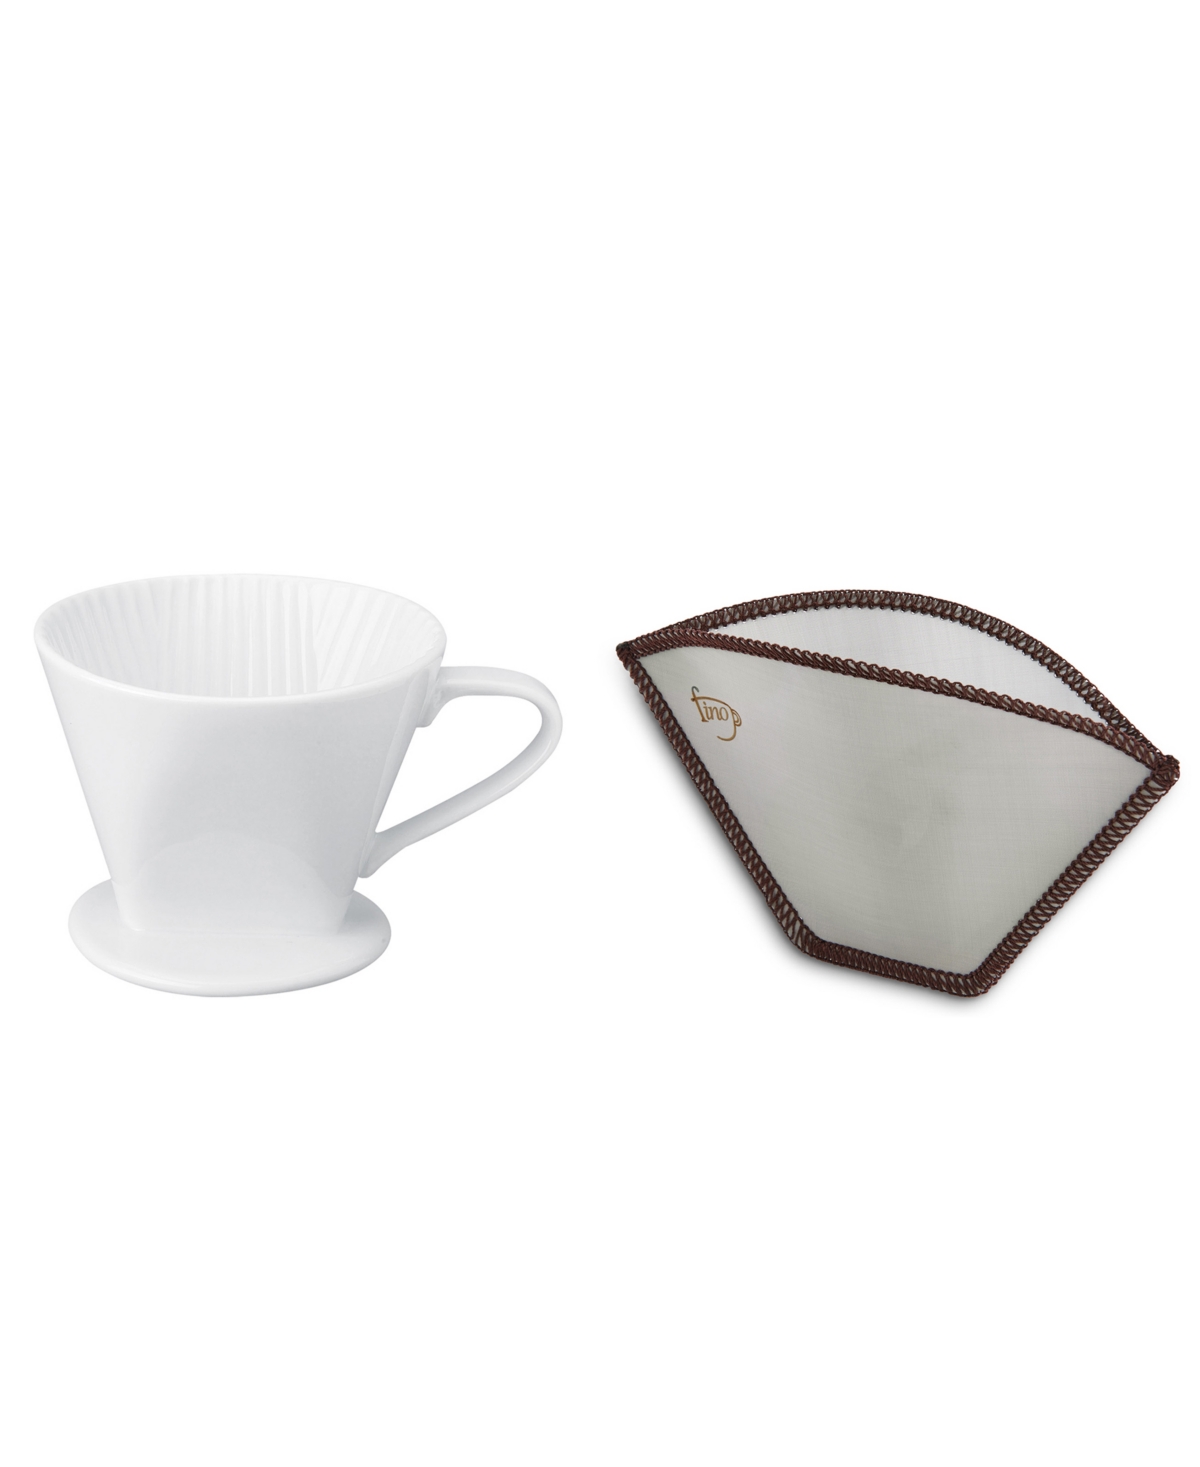 Fino Number 2-size Porcelain Filter Cone And Flexible Mesh Coffee Filter, Brews 2 To 6-servings In White